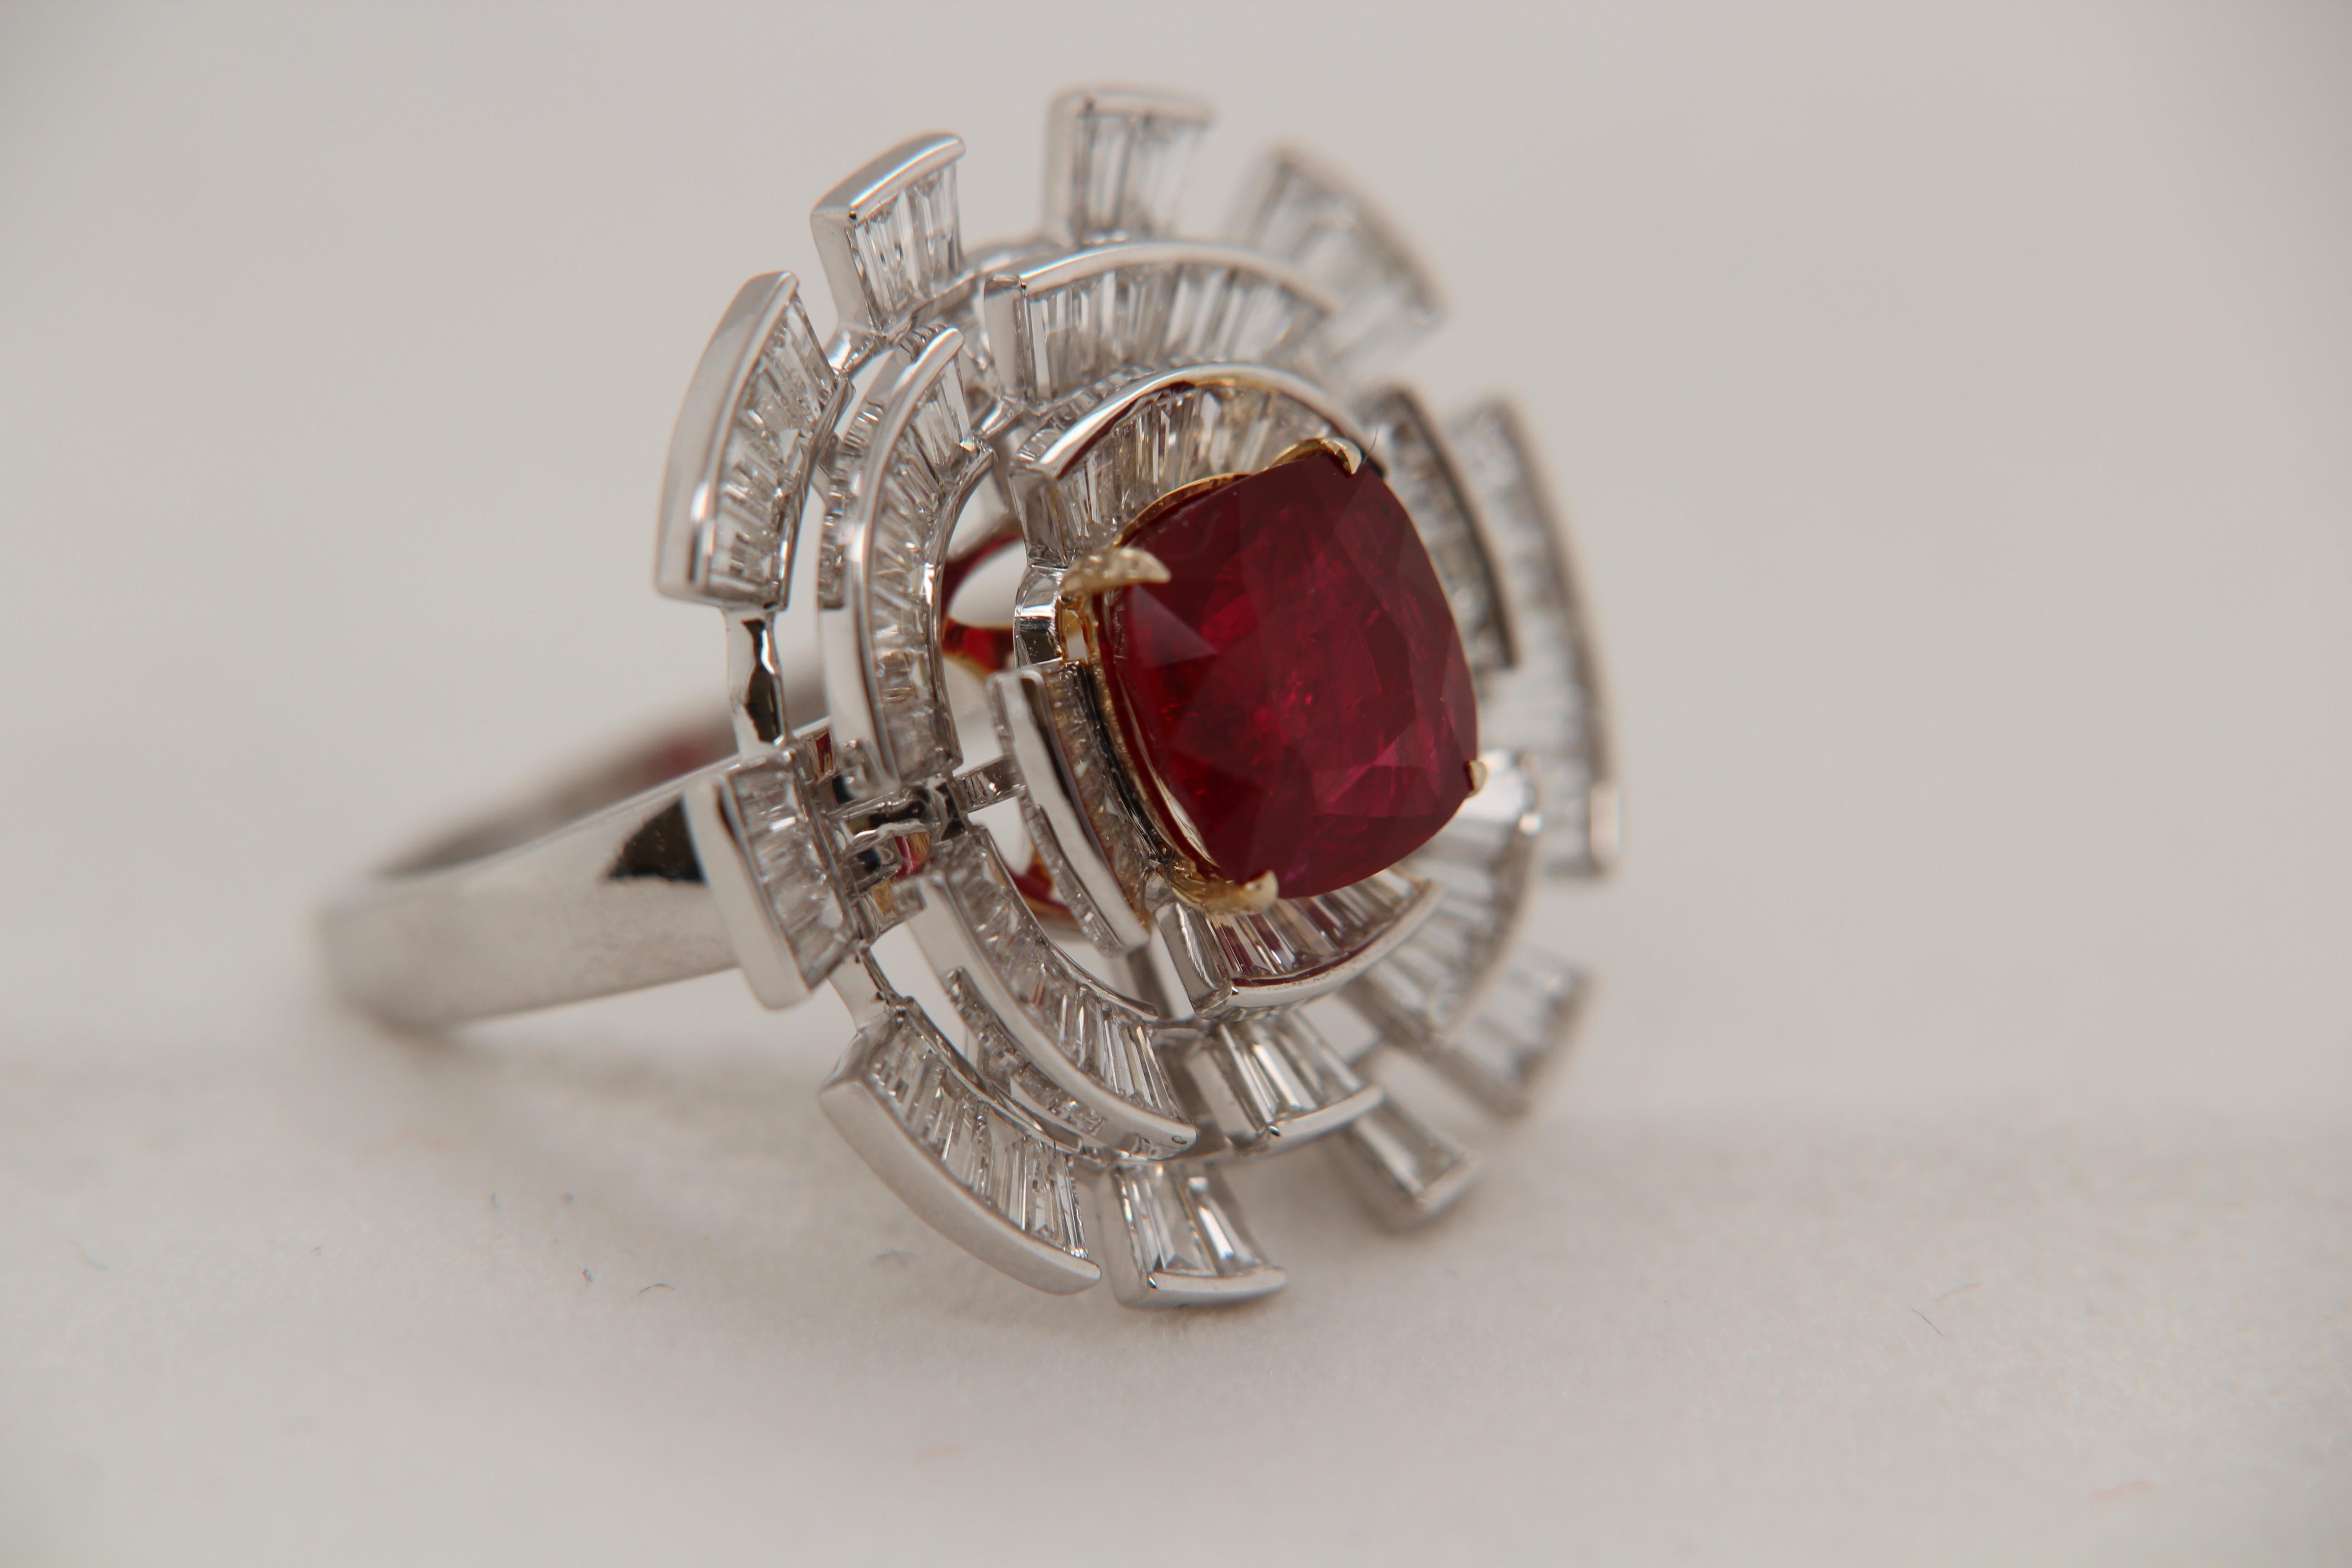 A brand new 2.65 carat Burmese ruby ring mounted with diamonds in 18 Karat gold. The ruby weighs 2.65 carat and is certified by Gem Research Swisslab (GRS) as natural, no heat, and 'Vivid Red Pigeon's Blood'. The total diamond weight is 1.98 carat